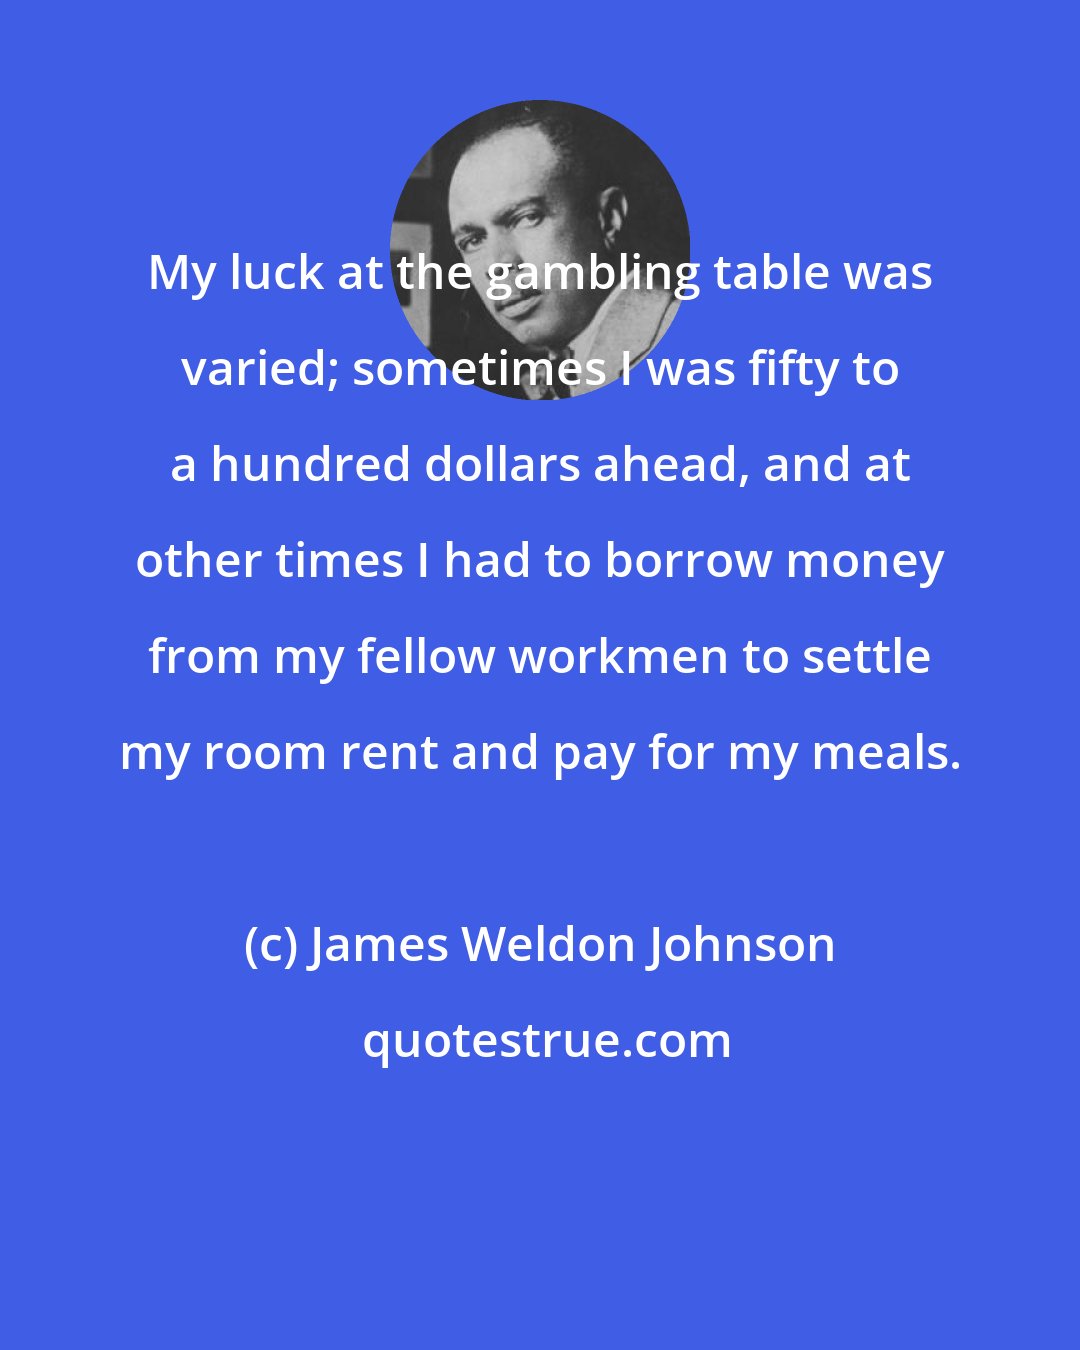 James Weldon Johnson: My luck at the gambling table was varied; sometimes I was fifty to a hundred dollars ahead, and at other times I had to borrow money from my fellow workmen to settle my room rent and pay for my meals.